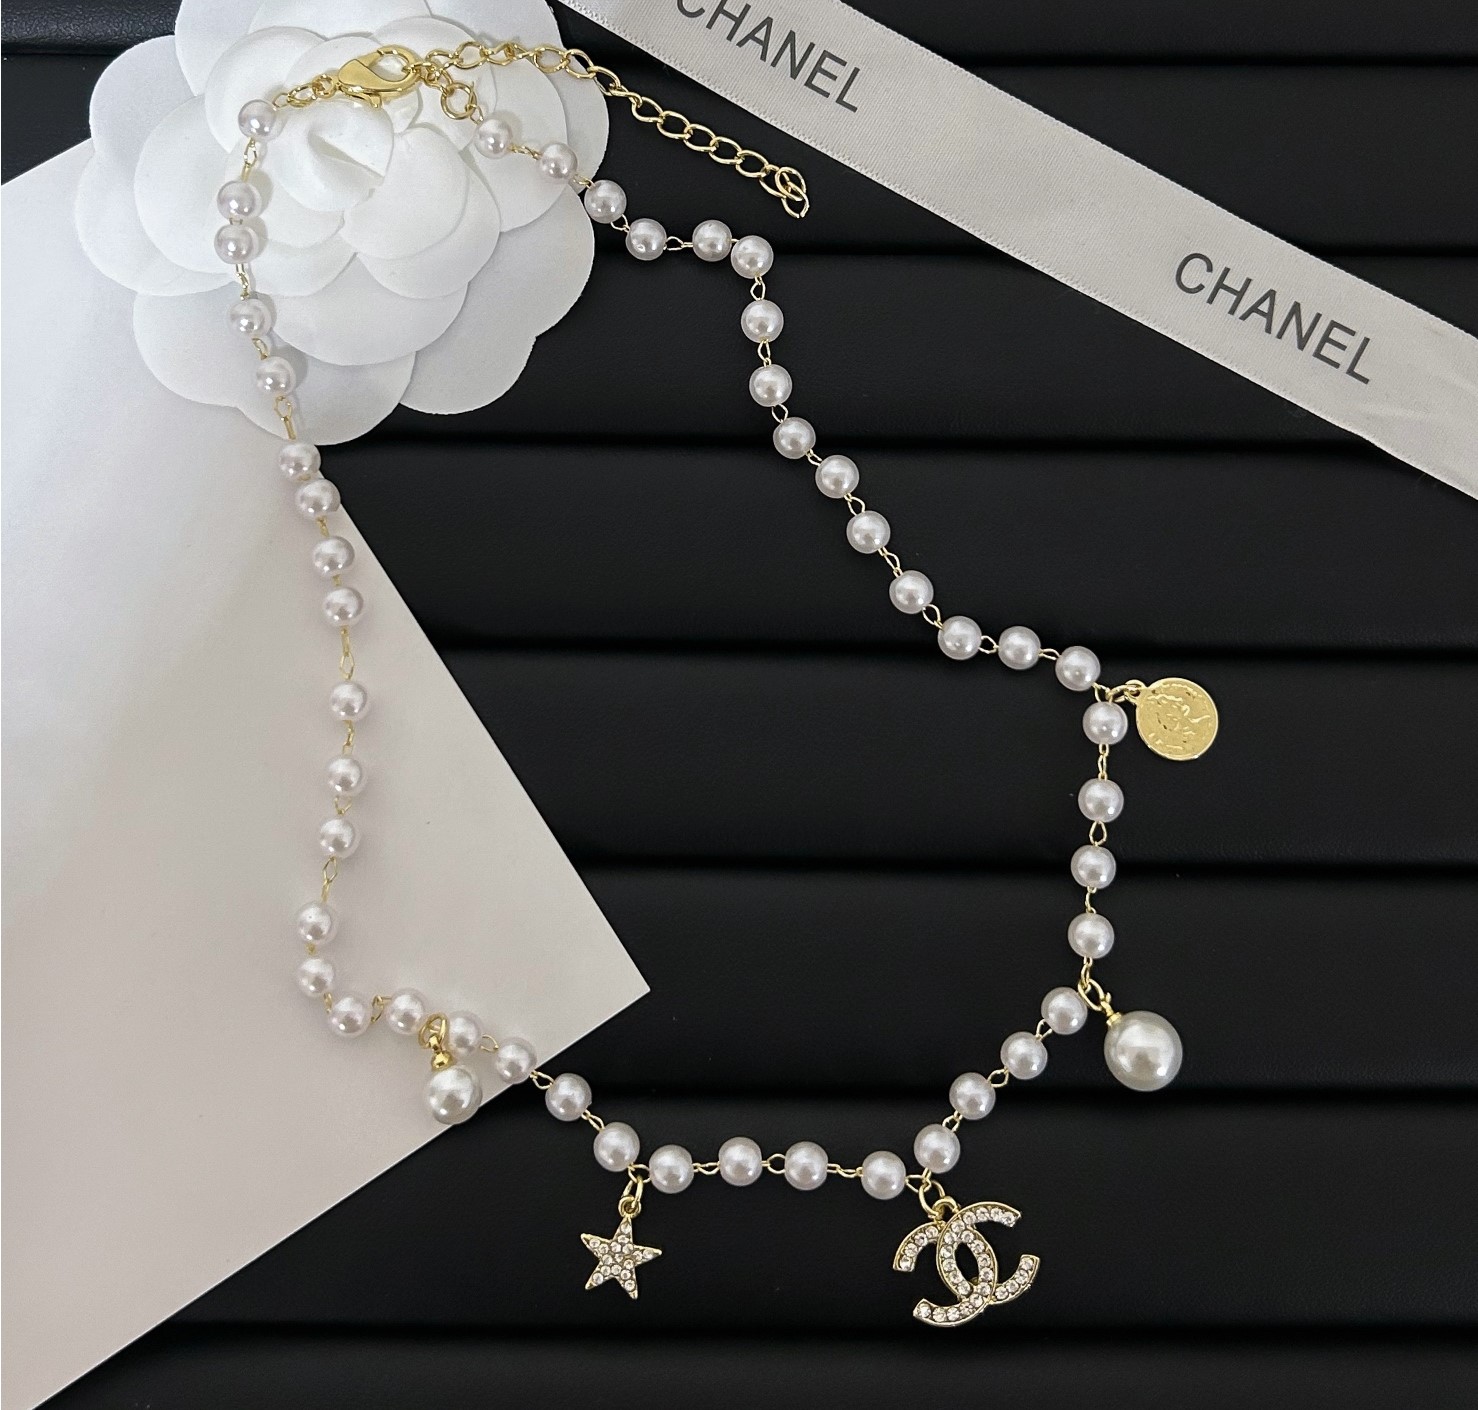 c96 Chanel necklace